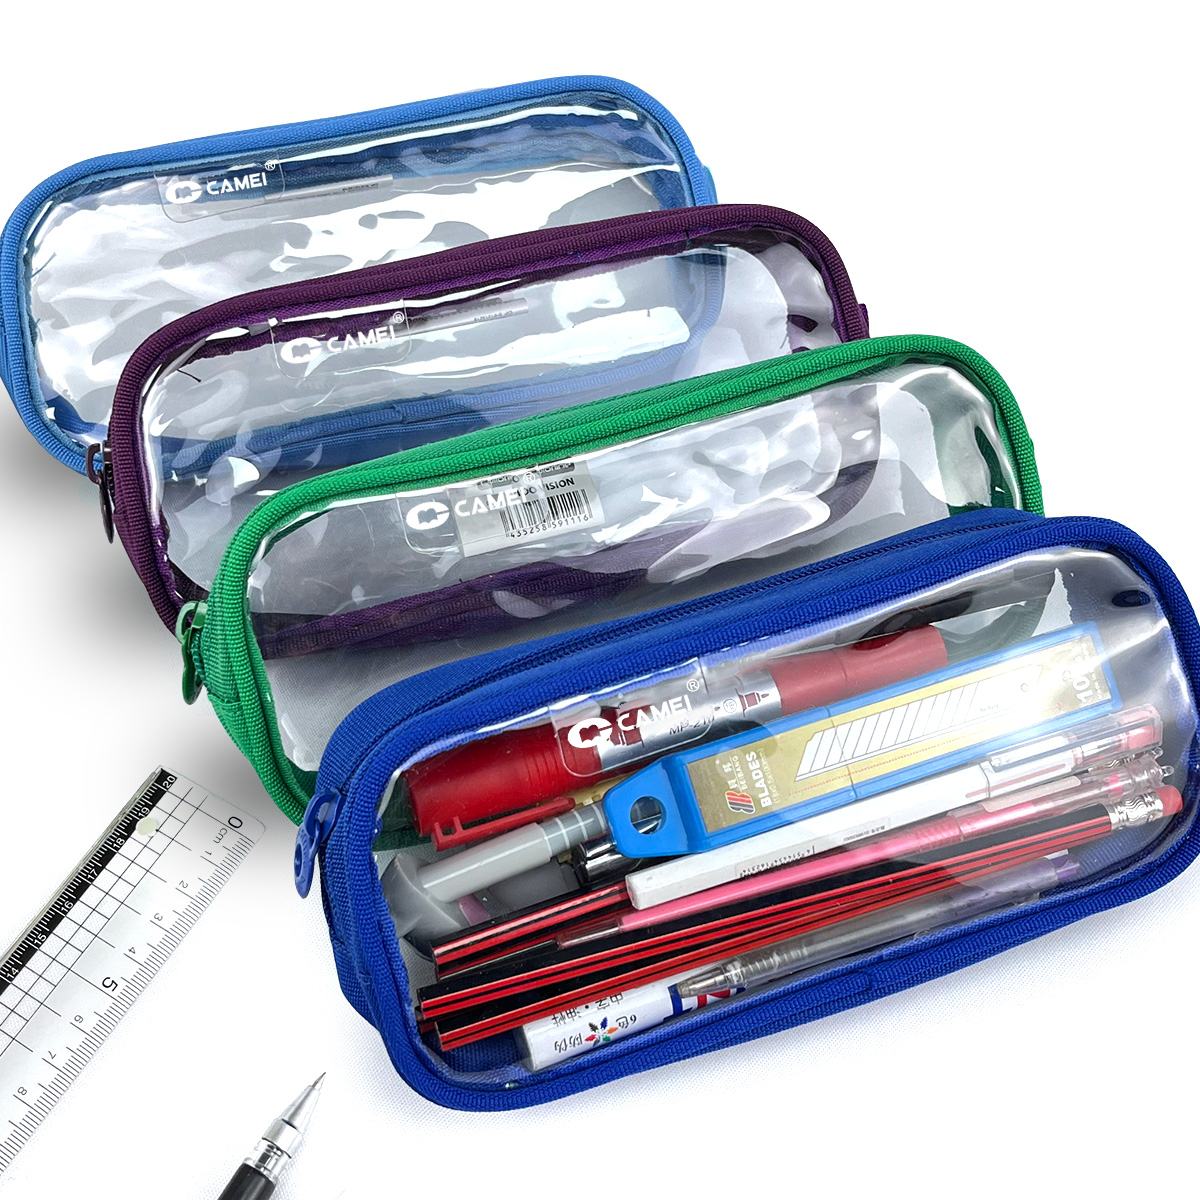 Square sharp transparent PVC poly pencil pouch pen case 5 colors available with zipper closure toiletry pouch great gift for kids teens adults for office school supplies daily use China OEM factory